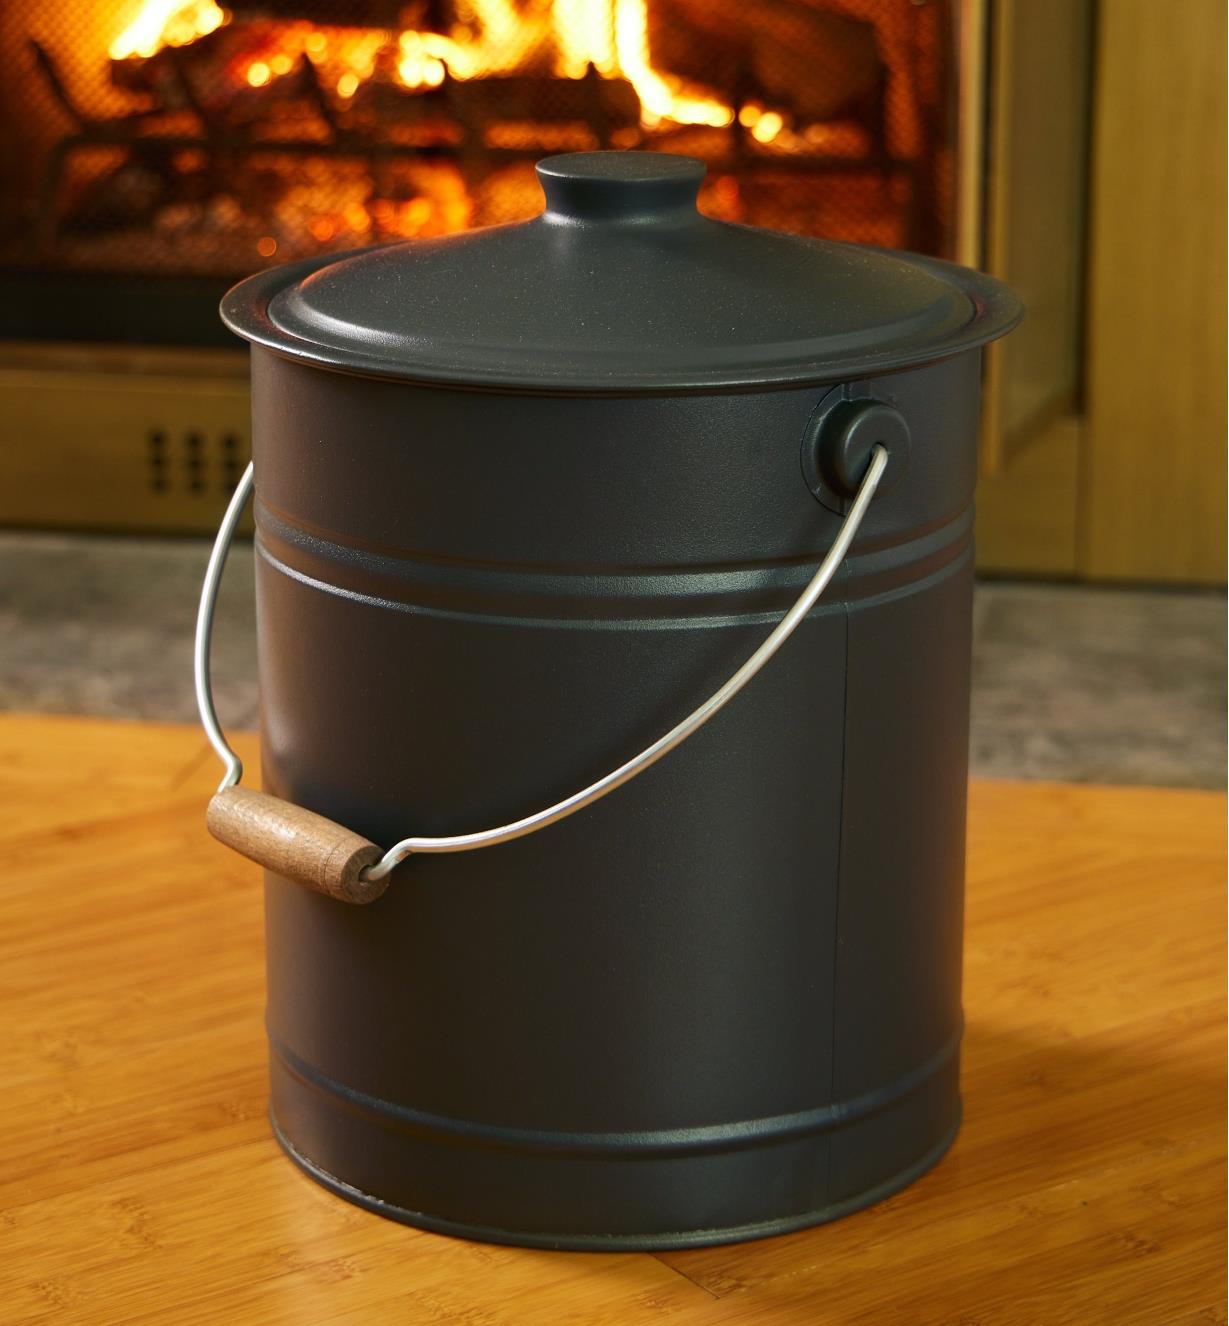 The ash can is placed near a fireplace